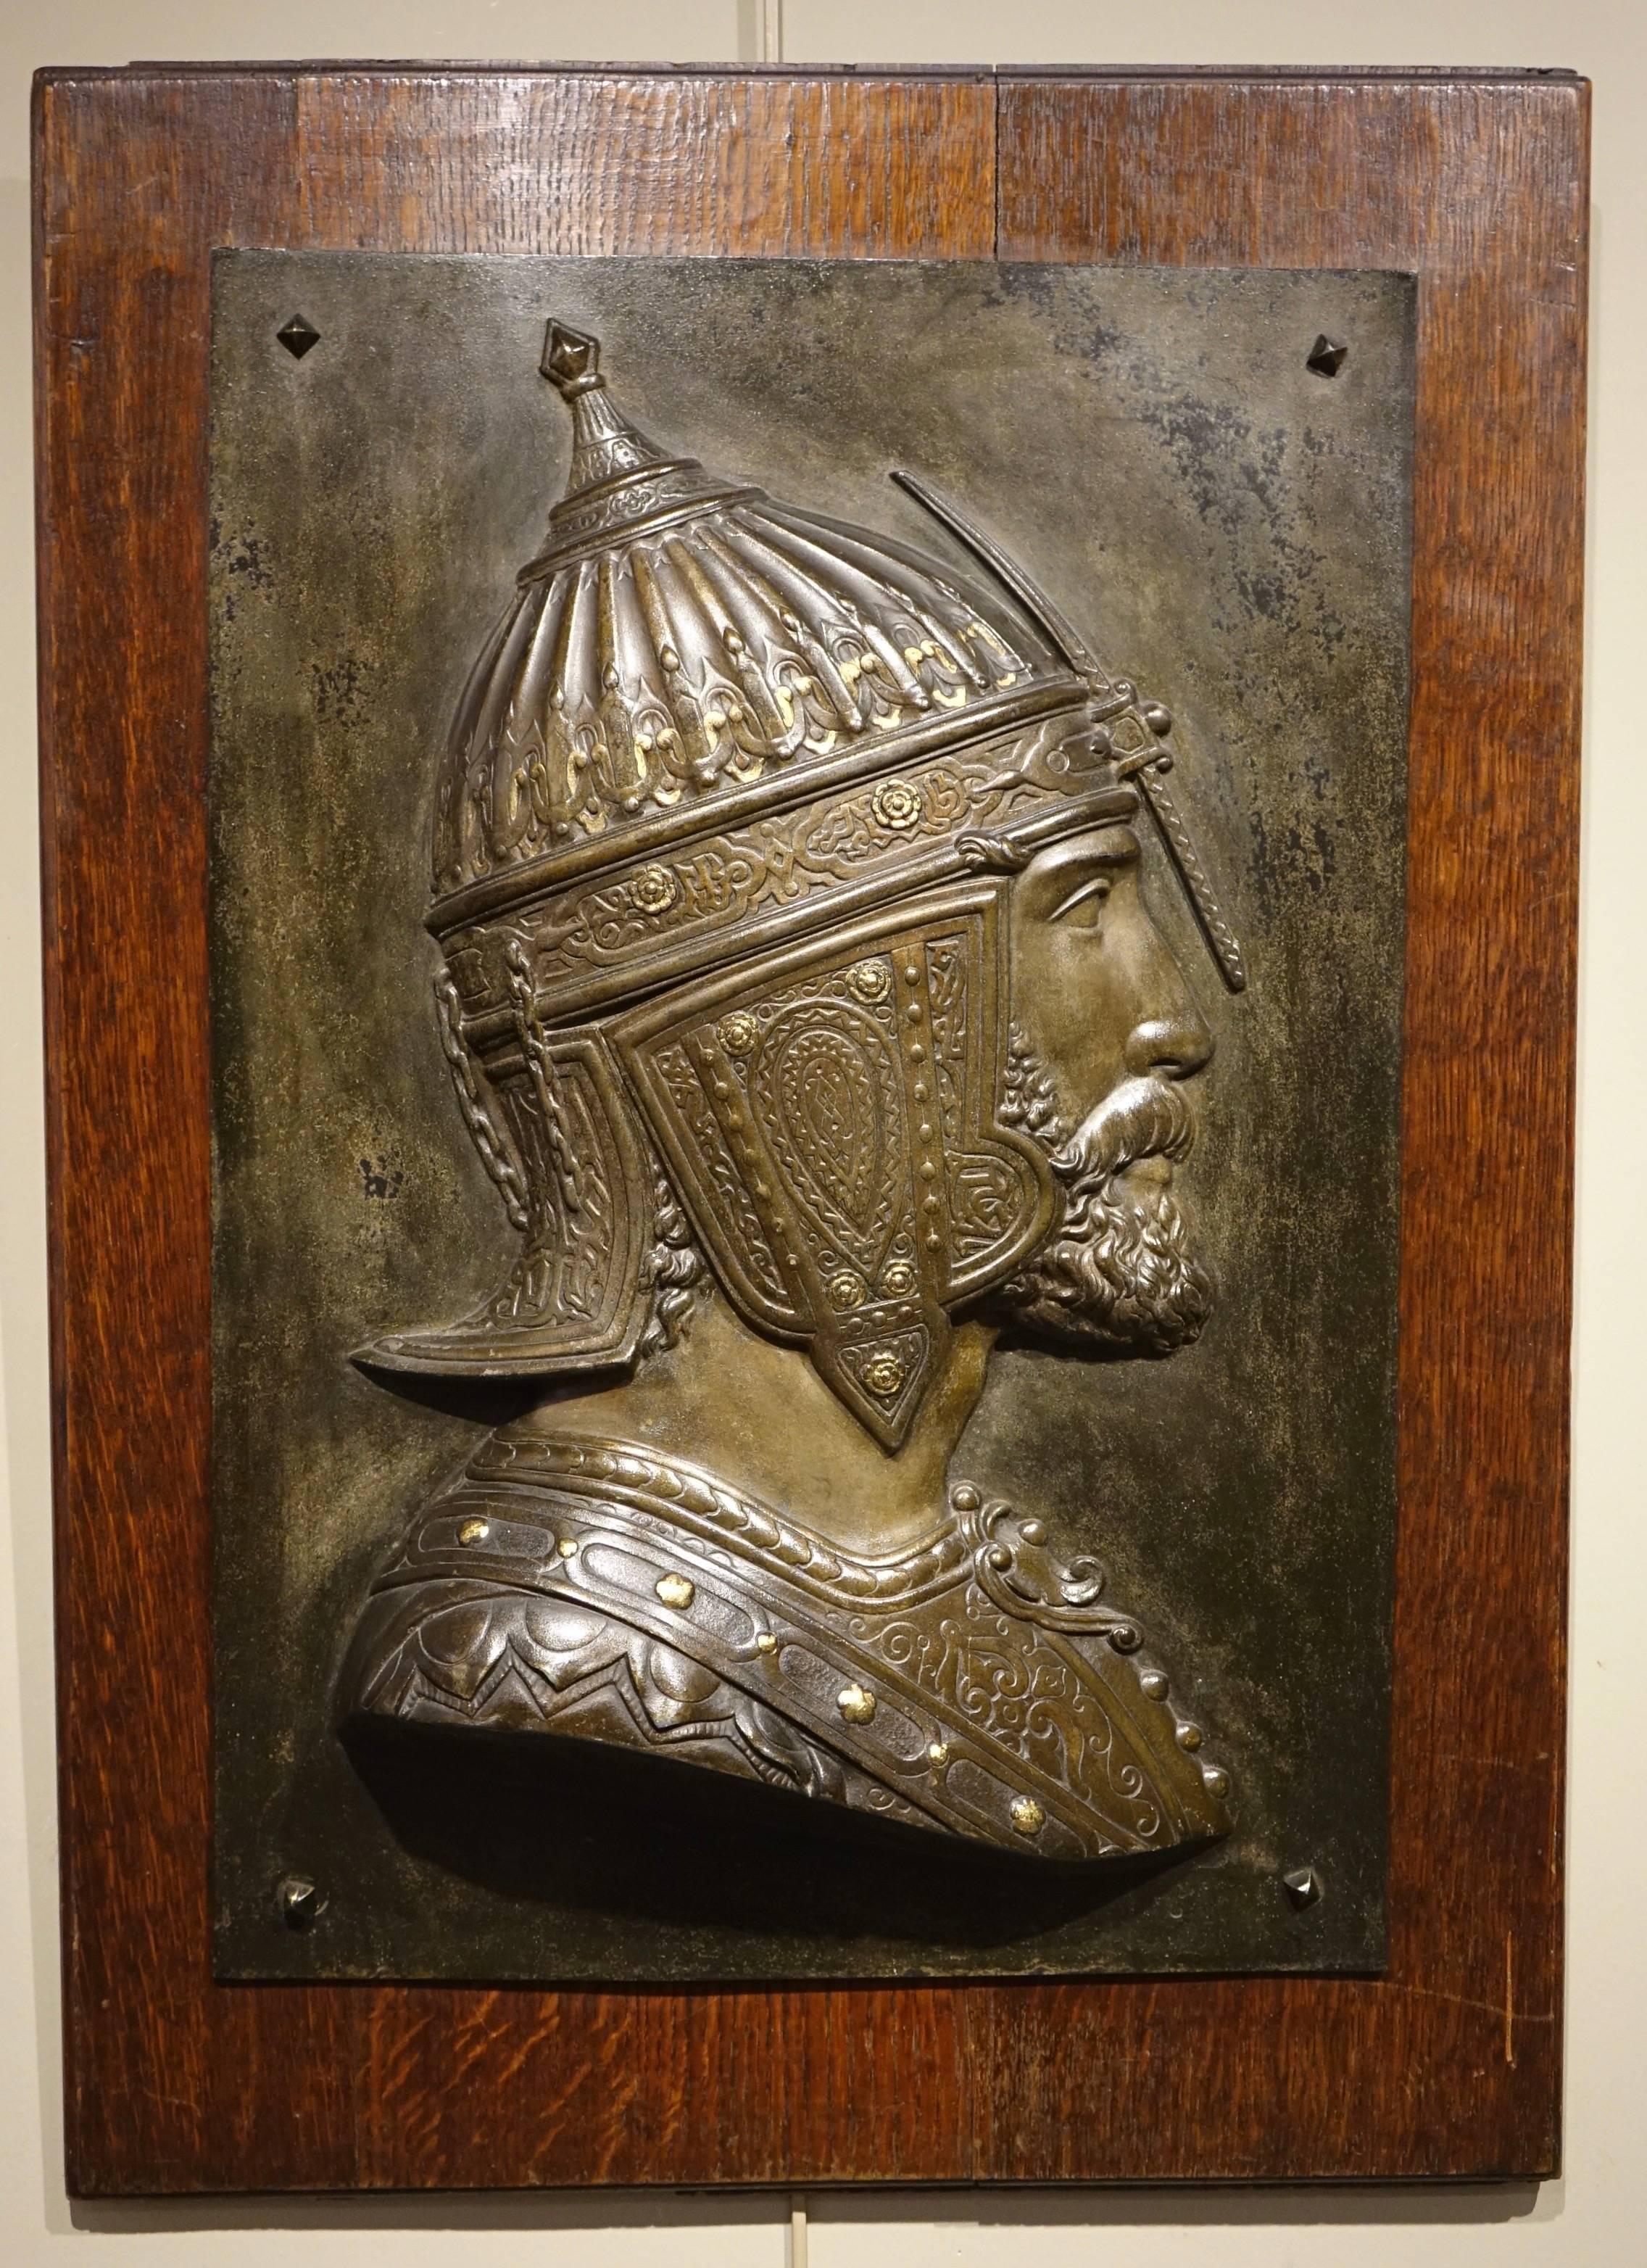 Metal Plate mounted on an oak plaque representing a Qadjar warrior seen in profile. Beautiful patina bronze with traces of gilding (or golden paint). 
Signed D. Lenoir (we had a counterpart on which the signature was more legible) from the Lenoir